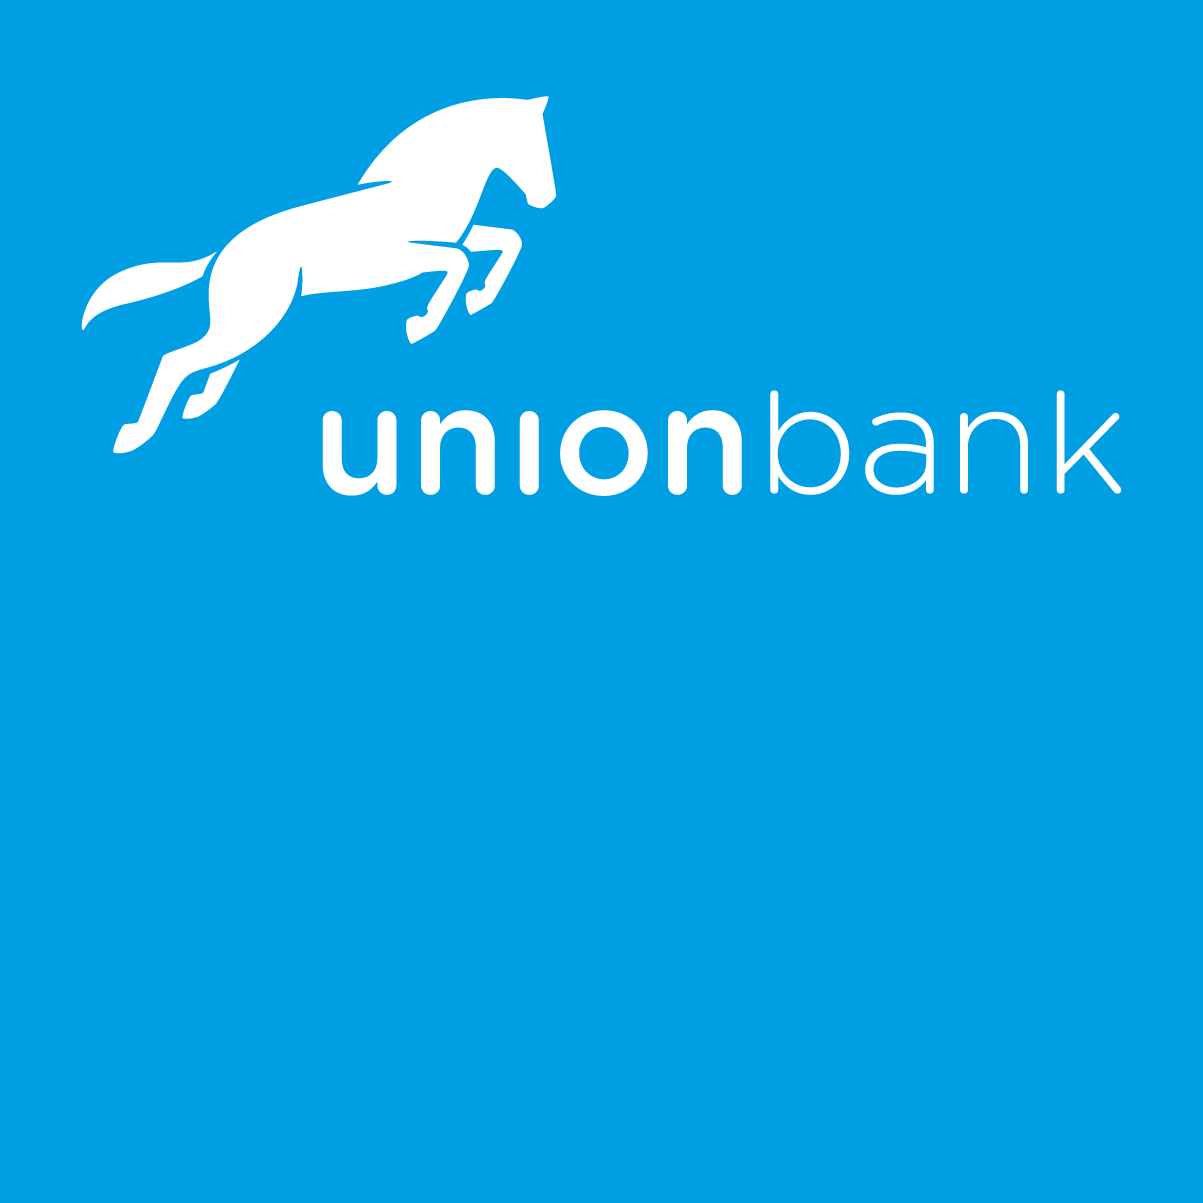 Union Bank’s Save & Win Promo Returns! More Customers to be Rewarded With Over 55 Million Naira